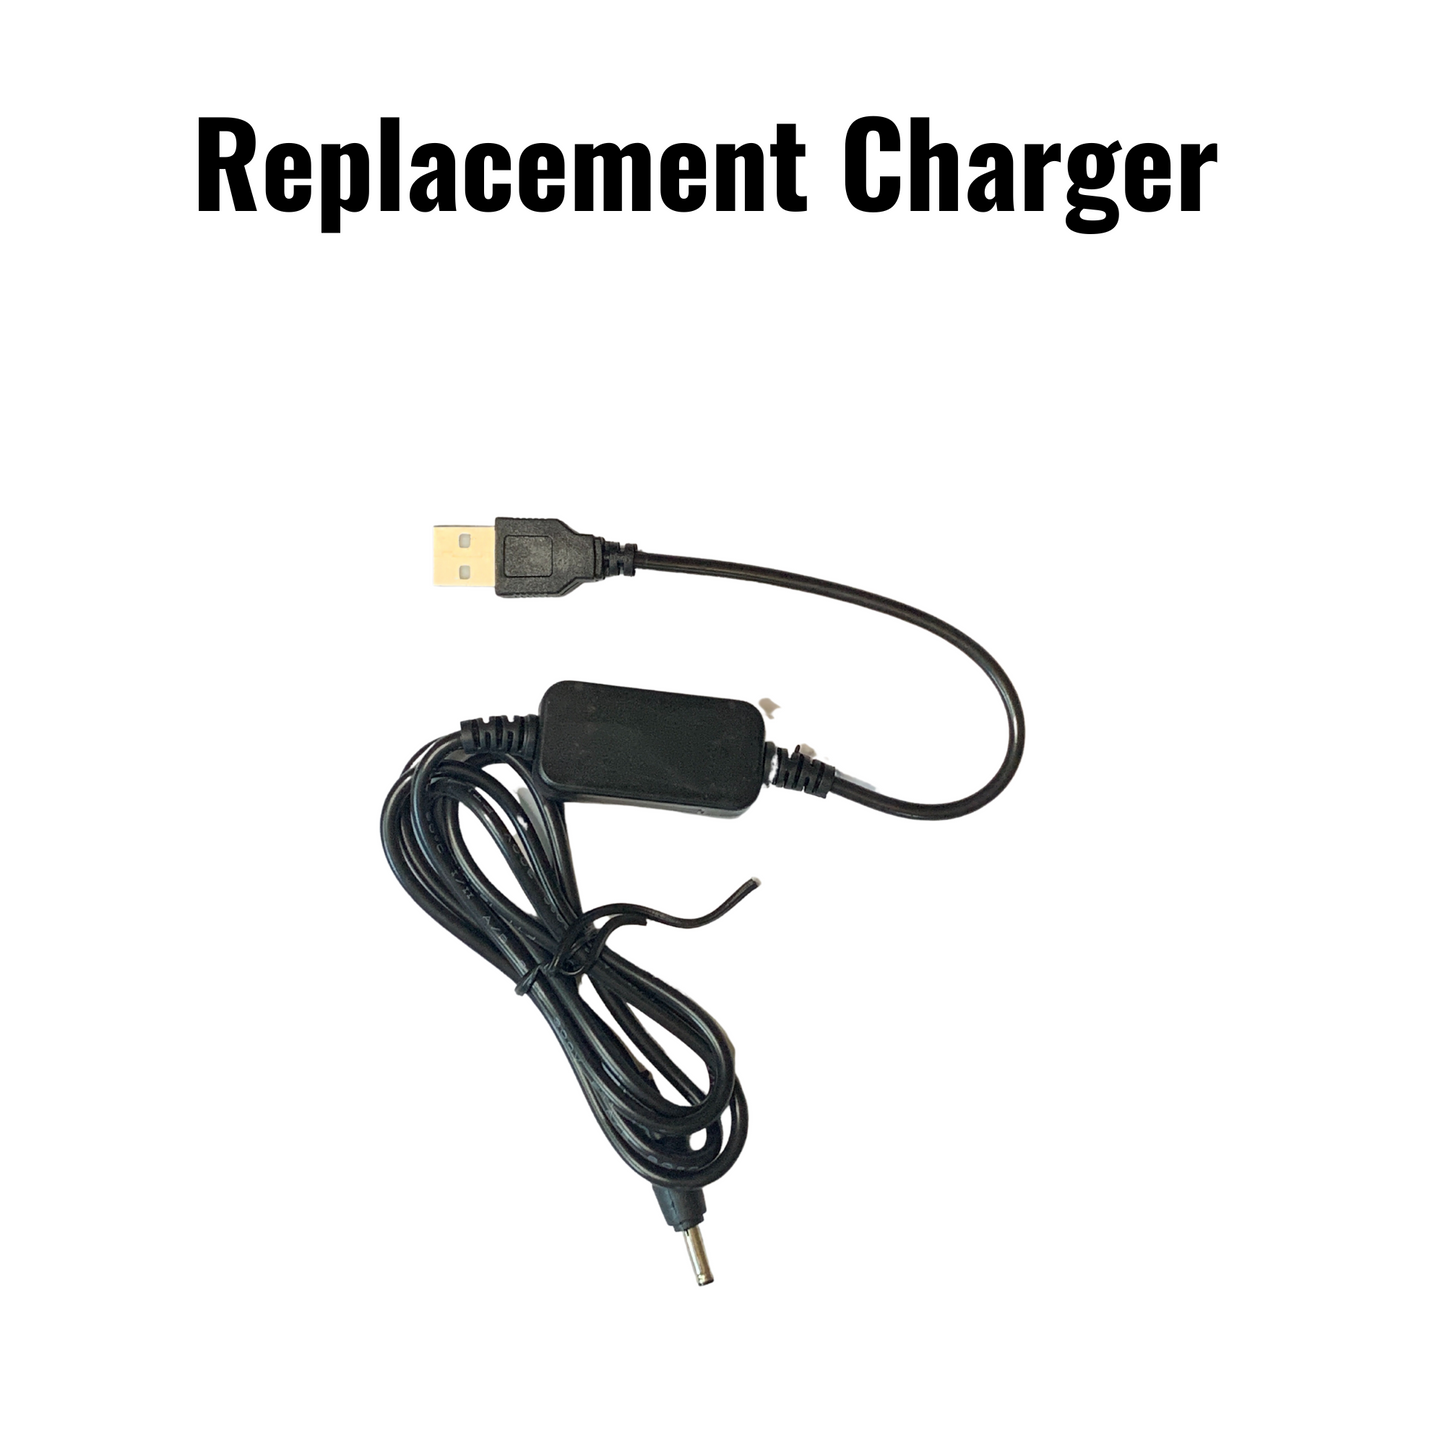 Hornet 2600 Replacement USB Charger